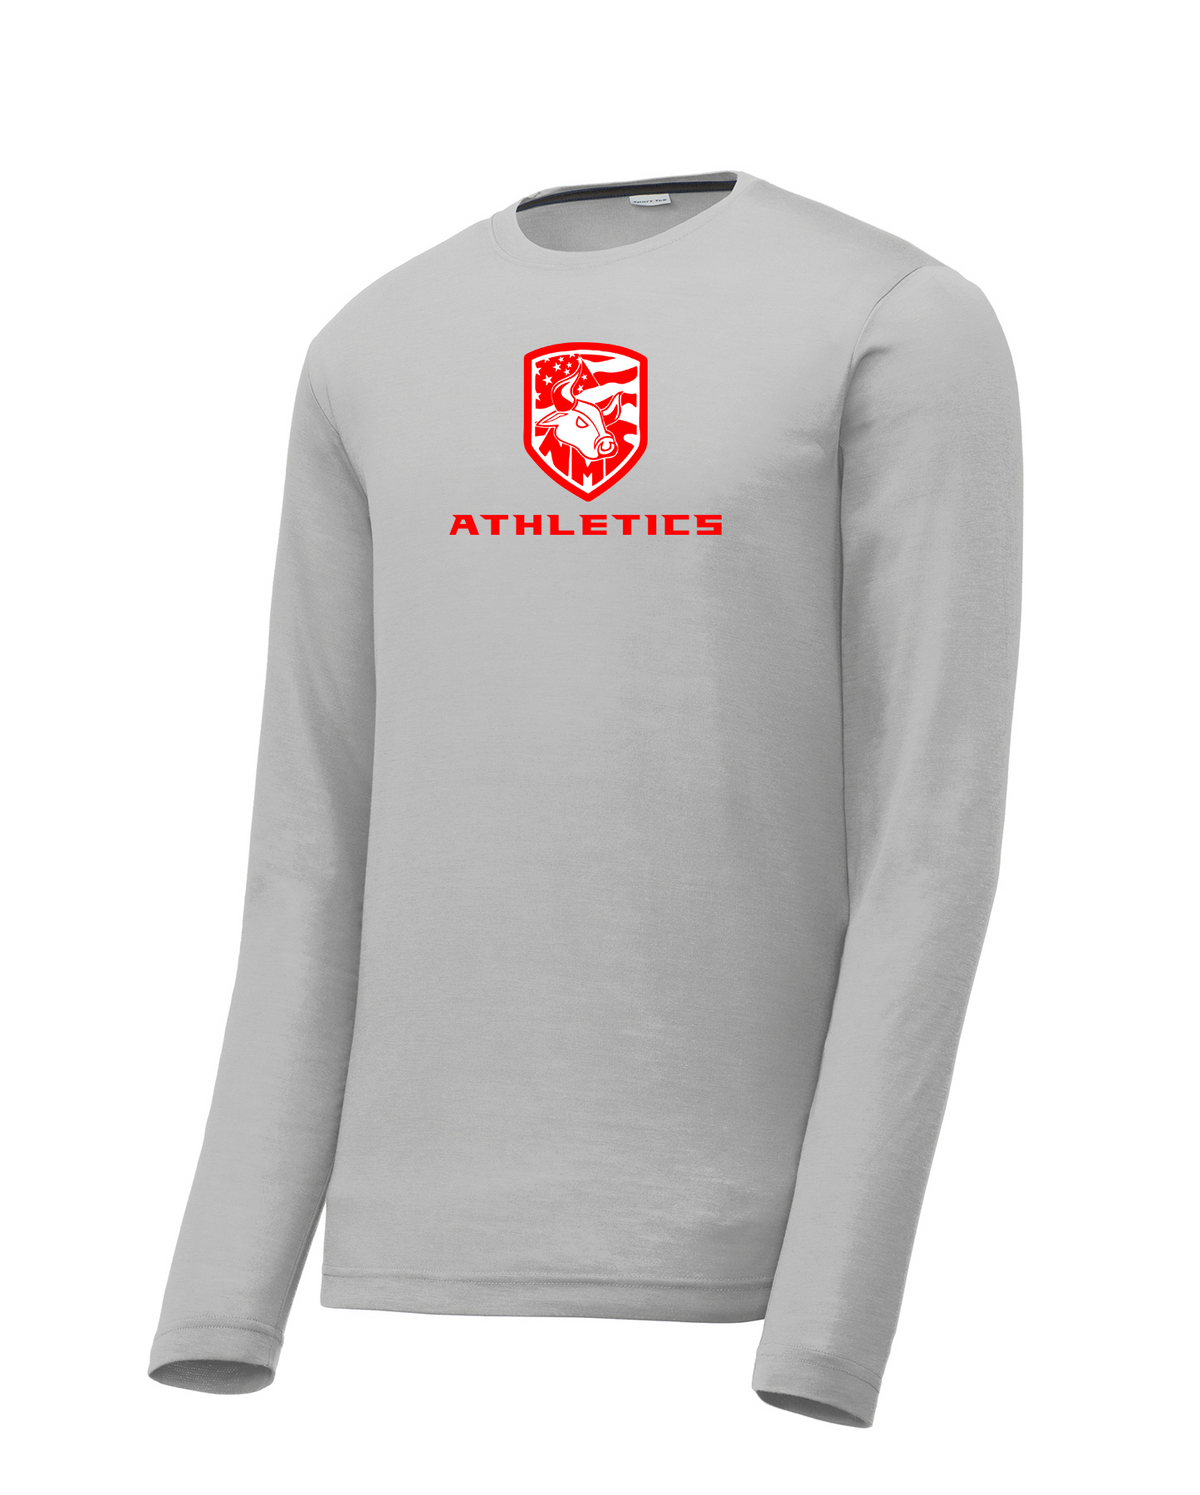 Nesaquake Middle School Athletics Silver Long Sleeve CottonTouch Performance Shirt